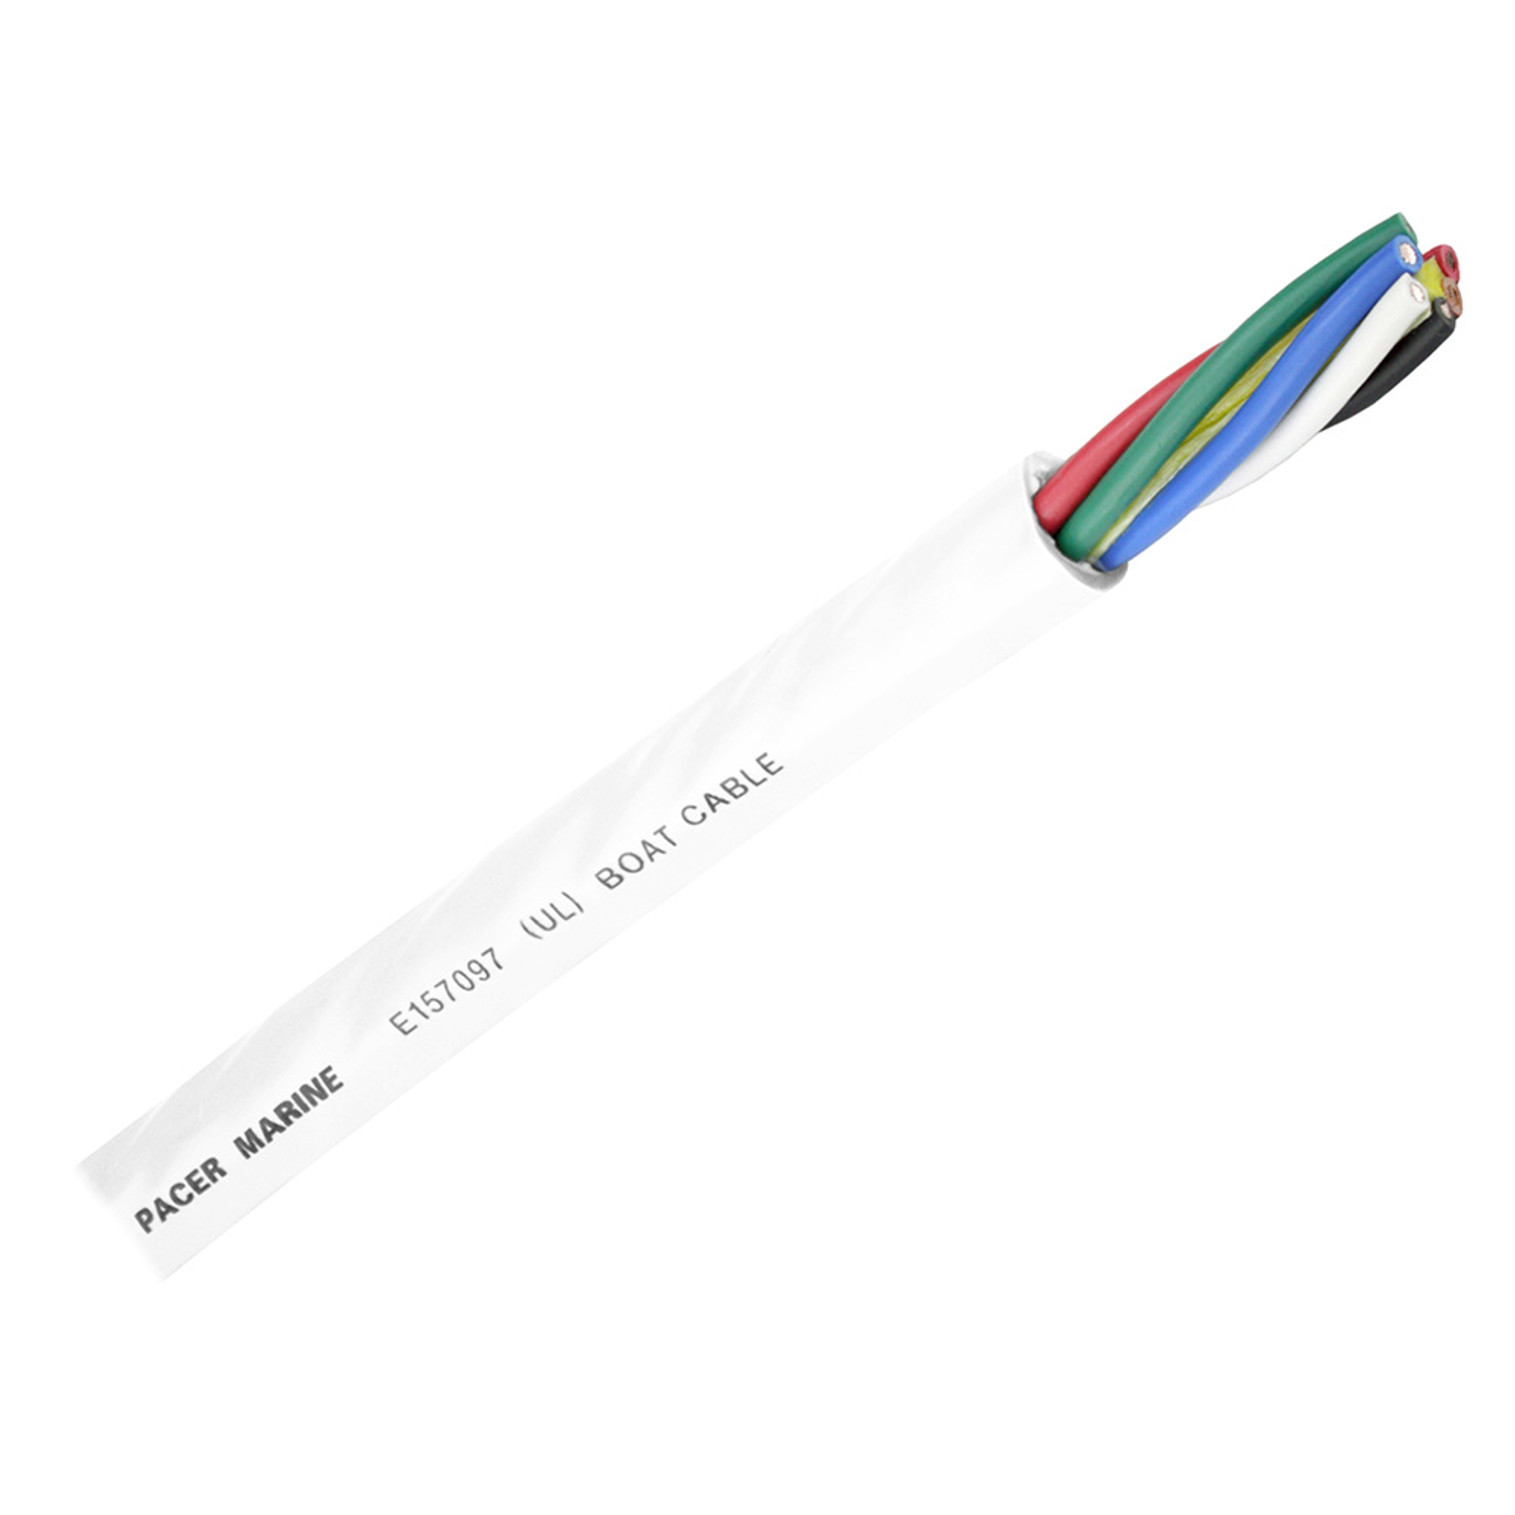 Pacer Round 6 Conductor Cable - 250' - 16/6 AWG - Black, Brown, Red, Green, Blue & White